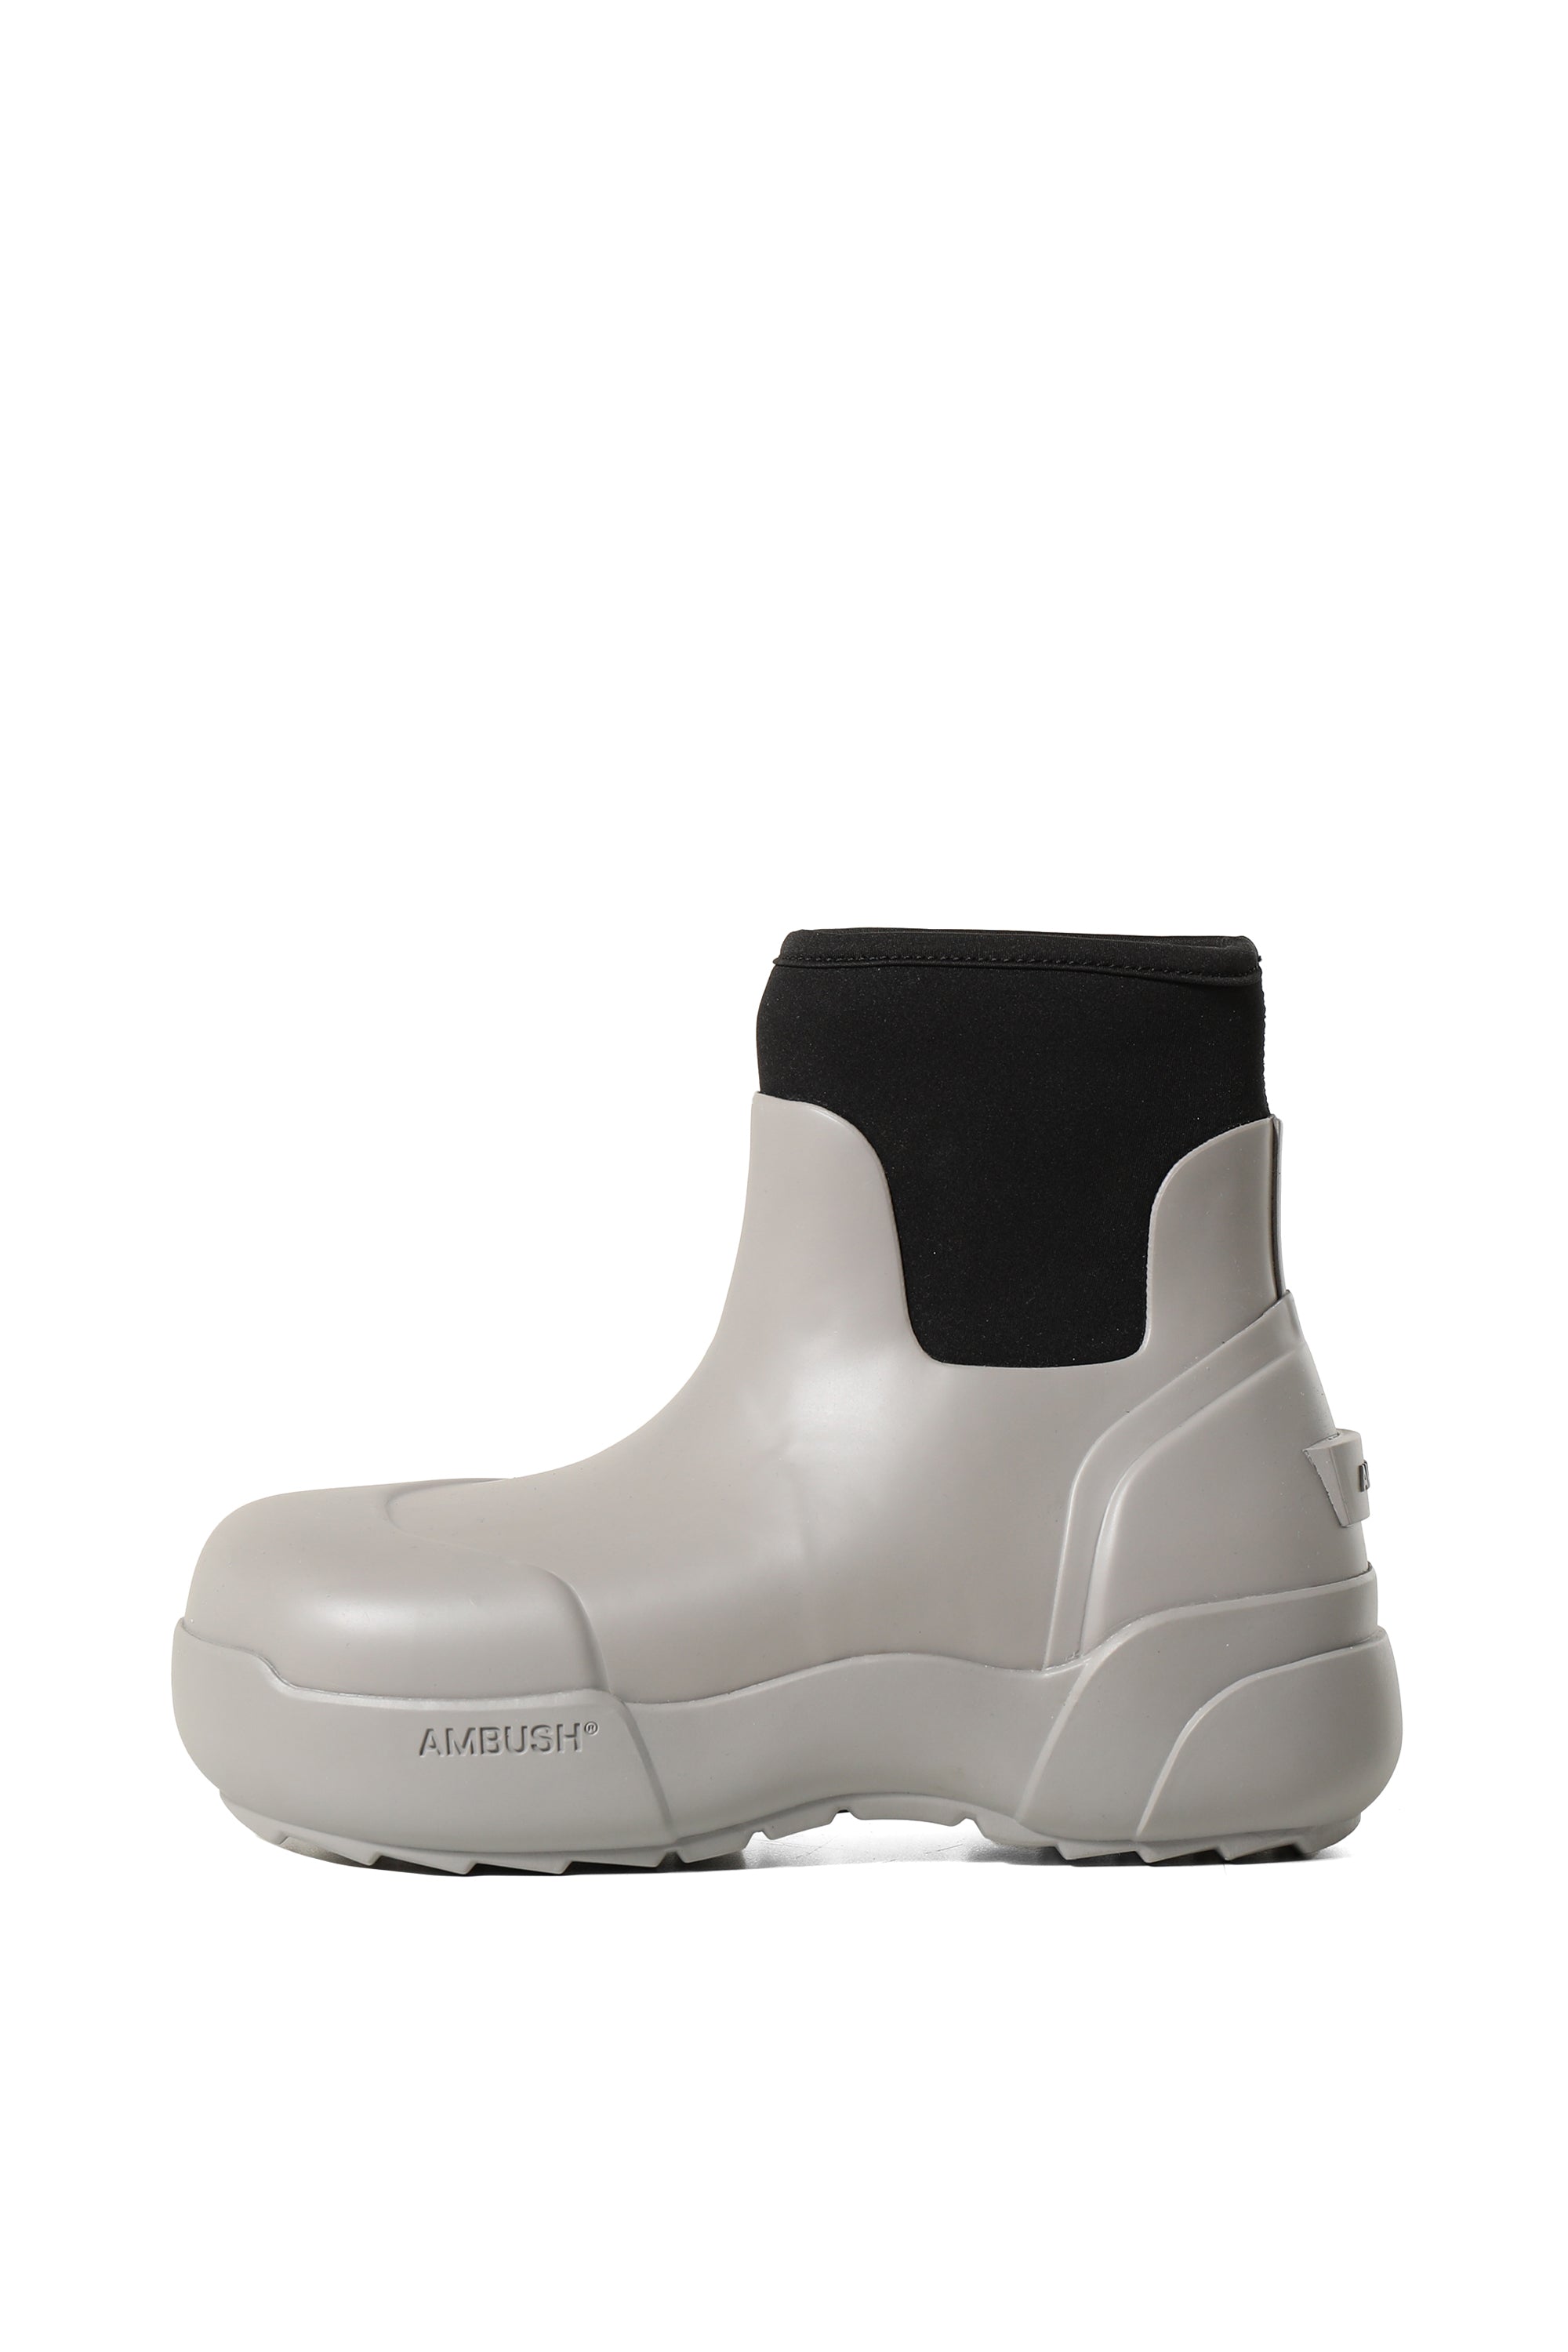 Rick Owens stocking sneakers ブーツ24.0